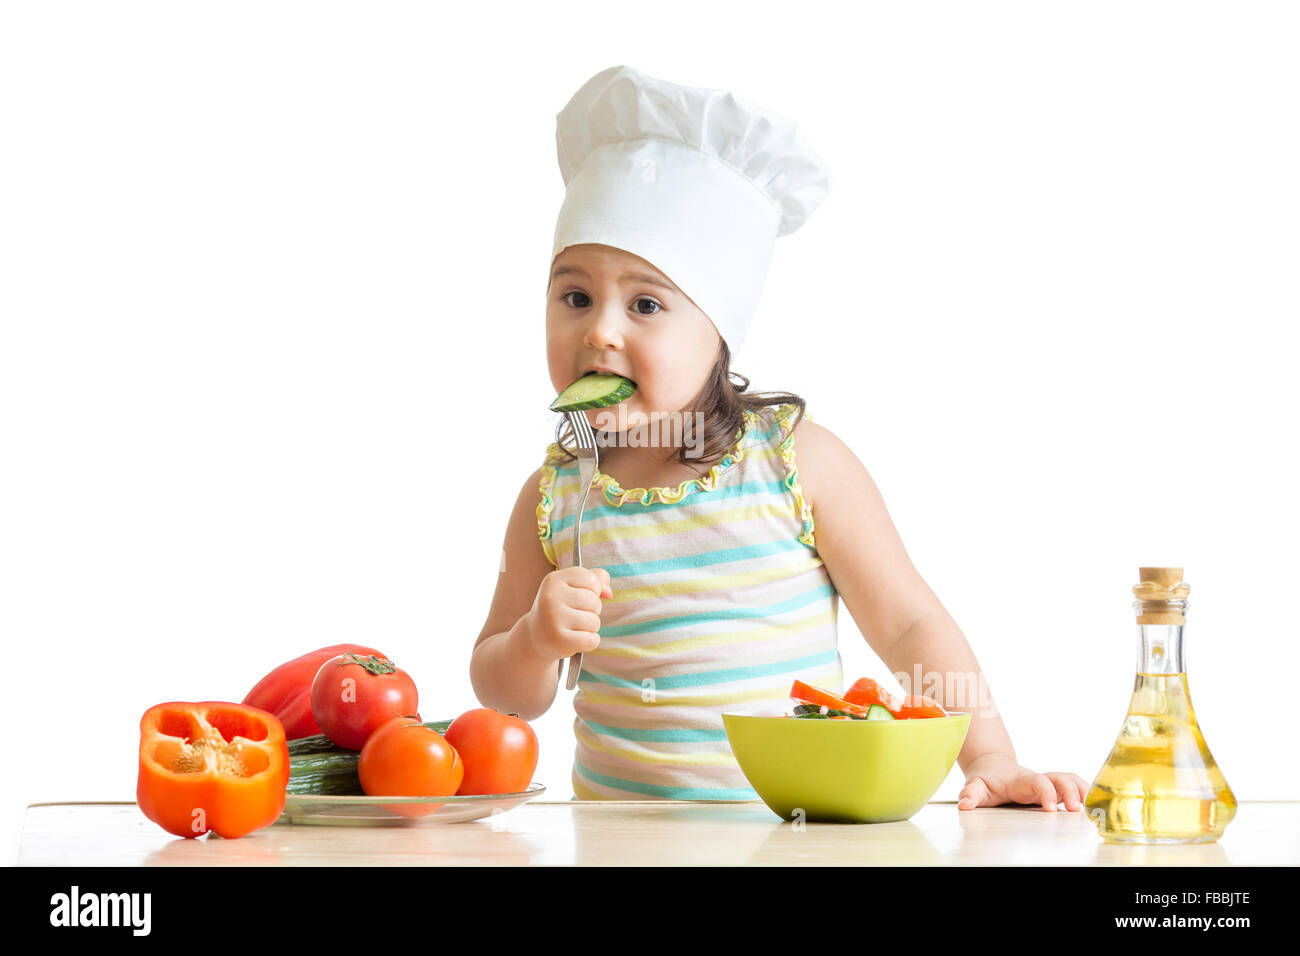 Chef girl preparing and tasting healthy food over white background Stock Photo